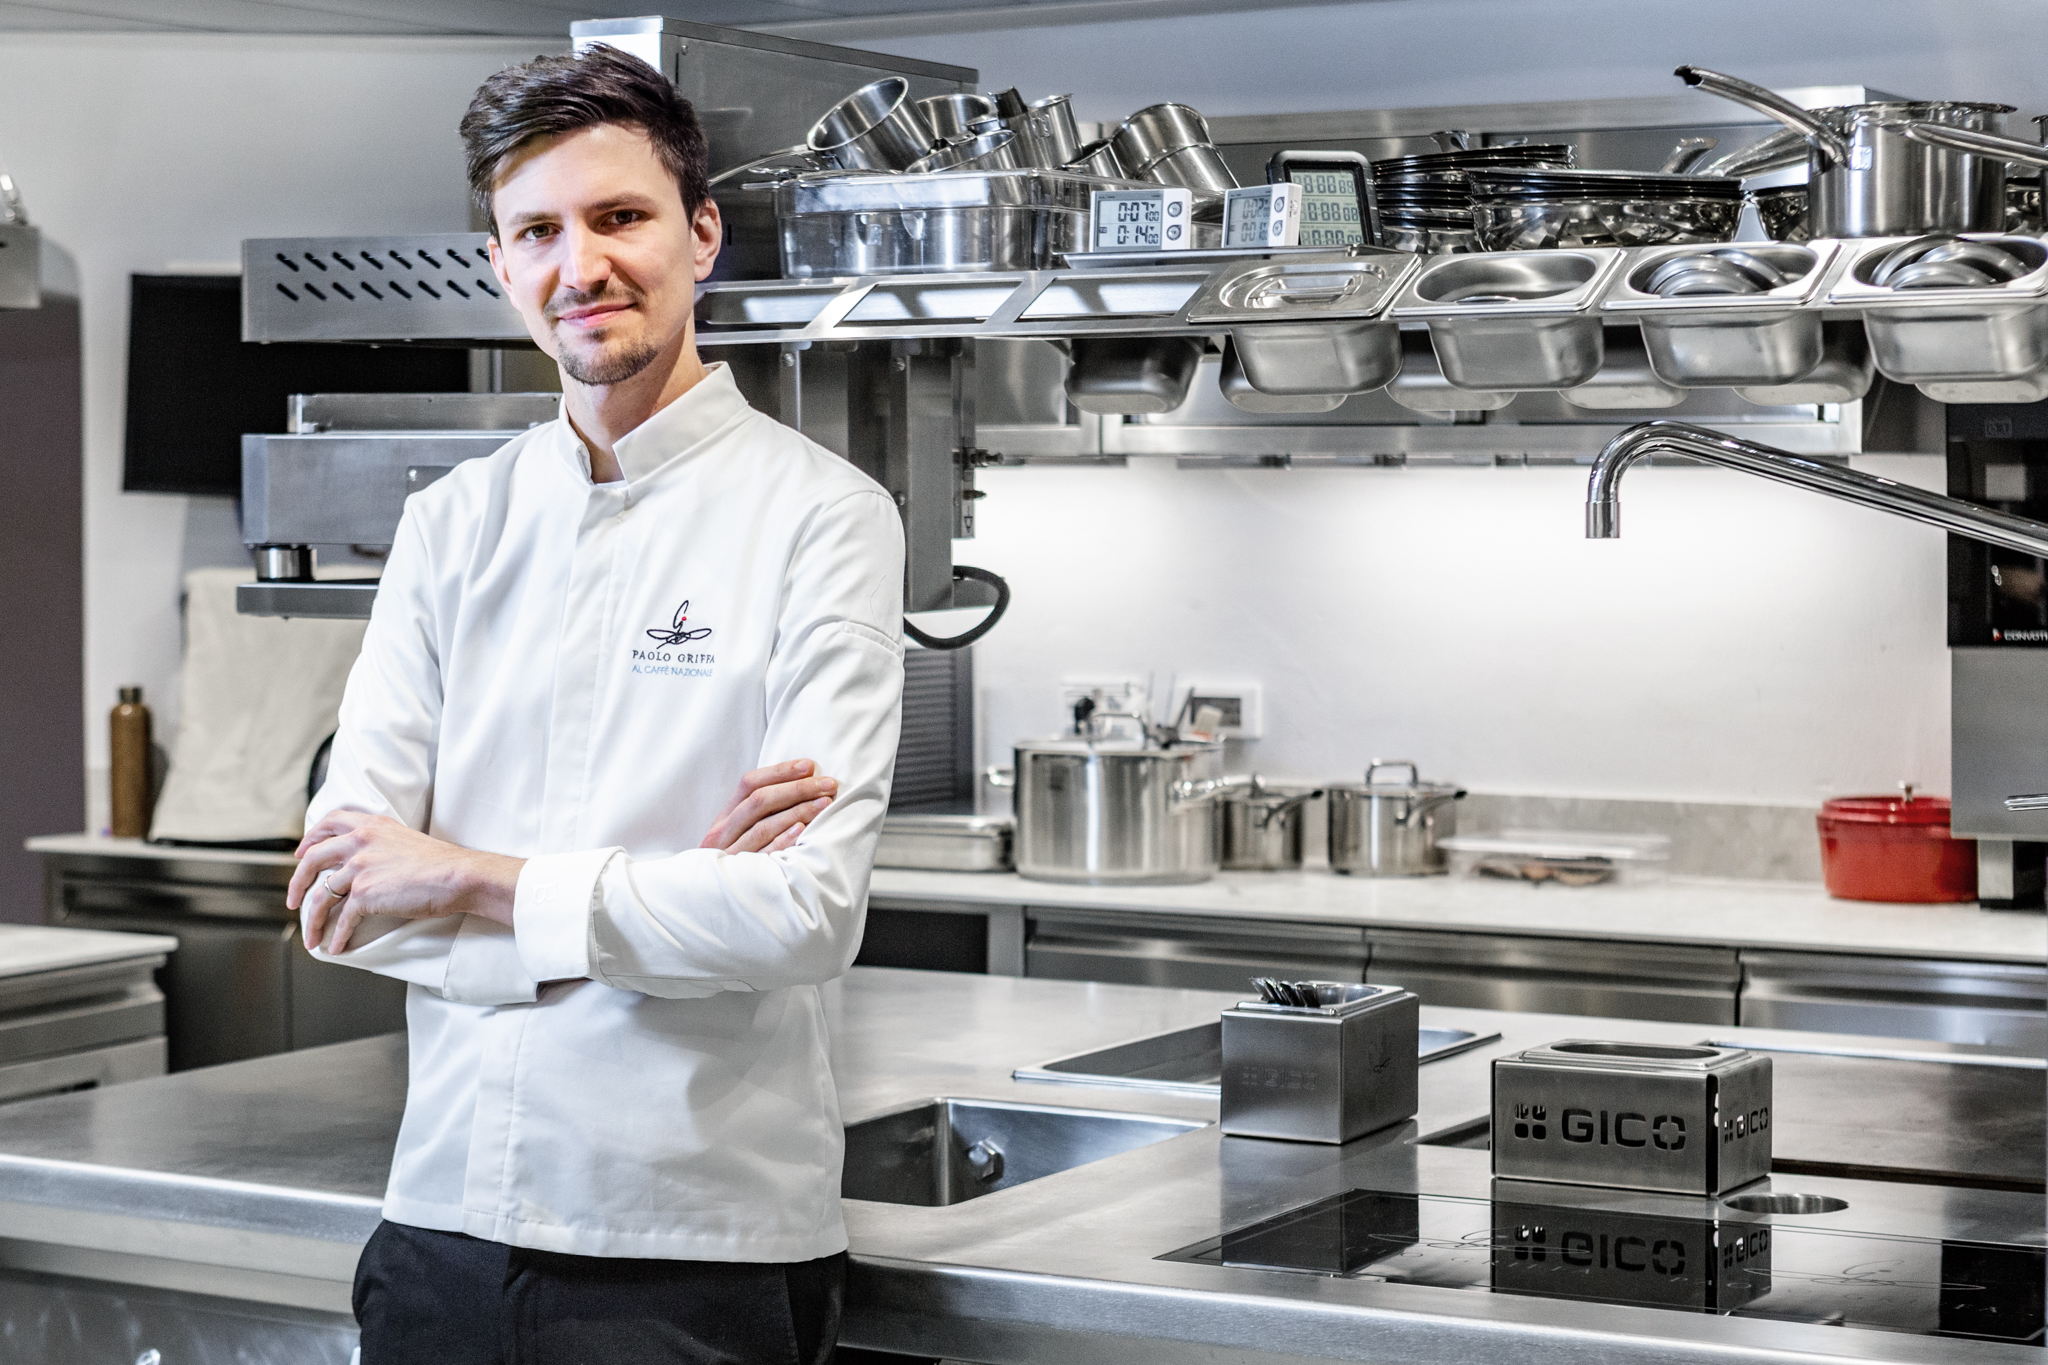 High-performance and tailor made monobloc. GICO’s kitchen for Paolo Griffa at The Caffè Nazionale